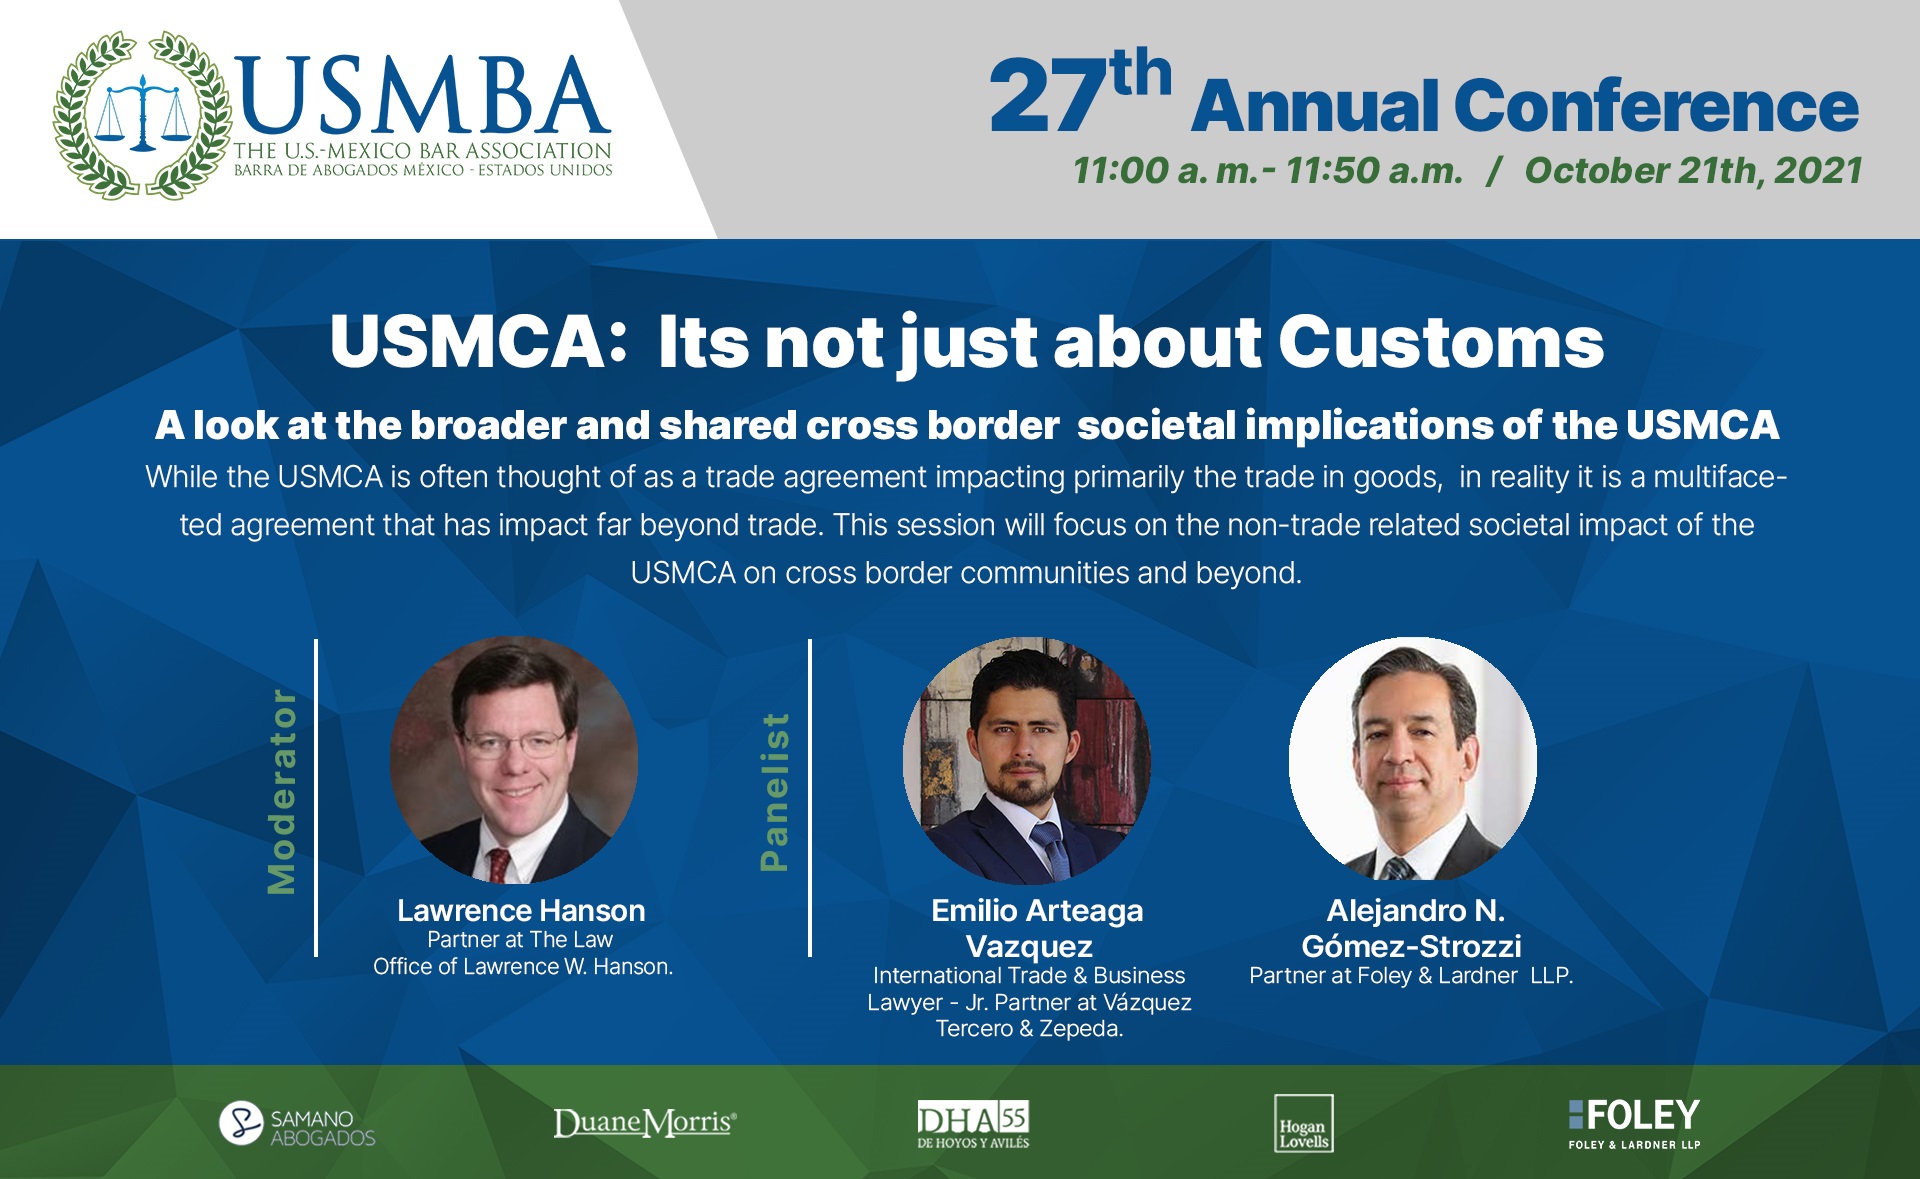 USMBA Annual Conference